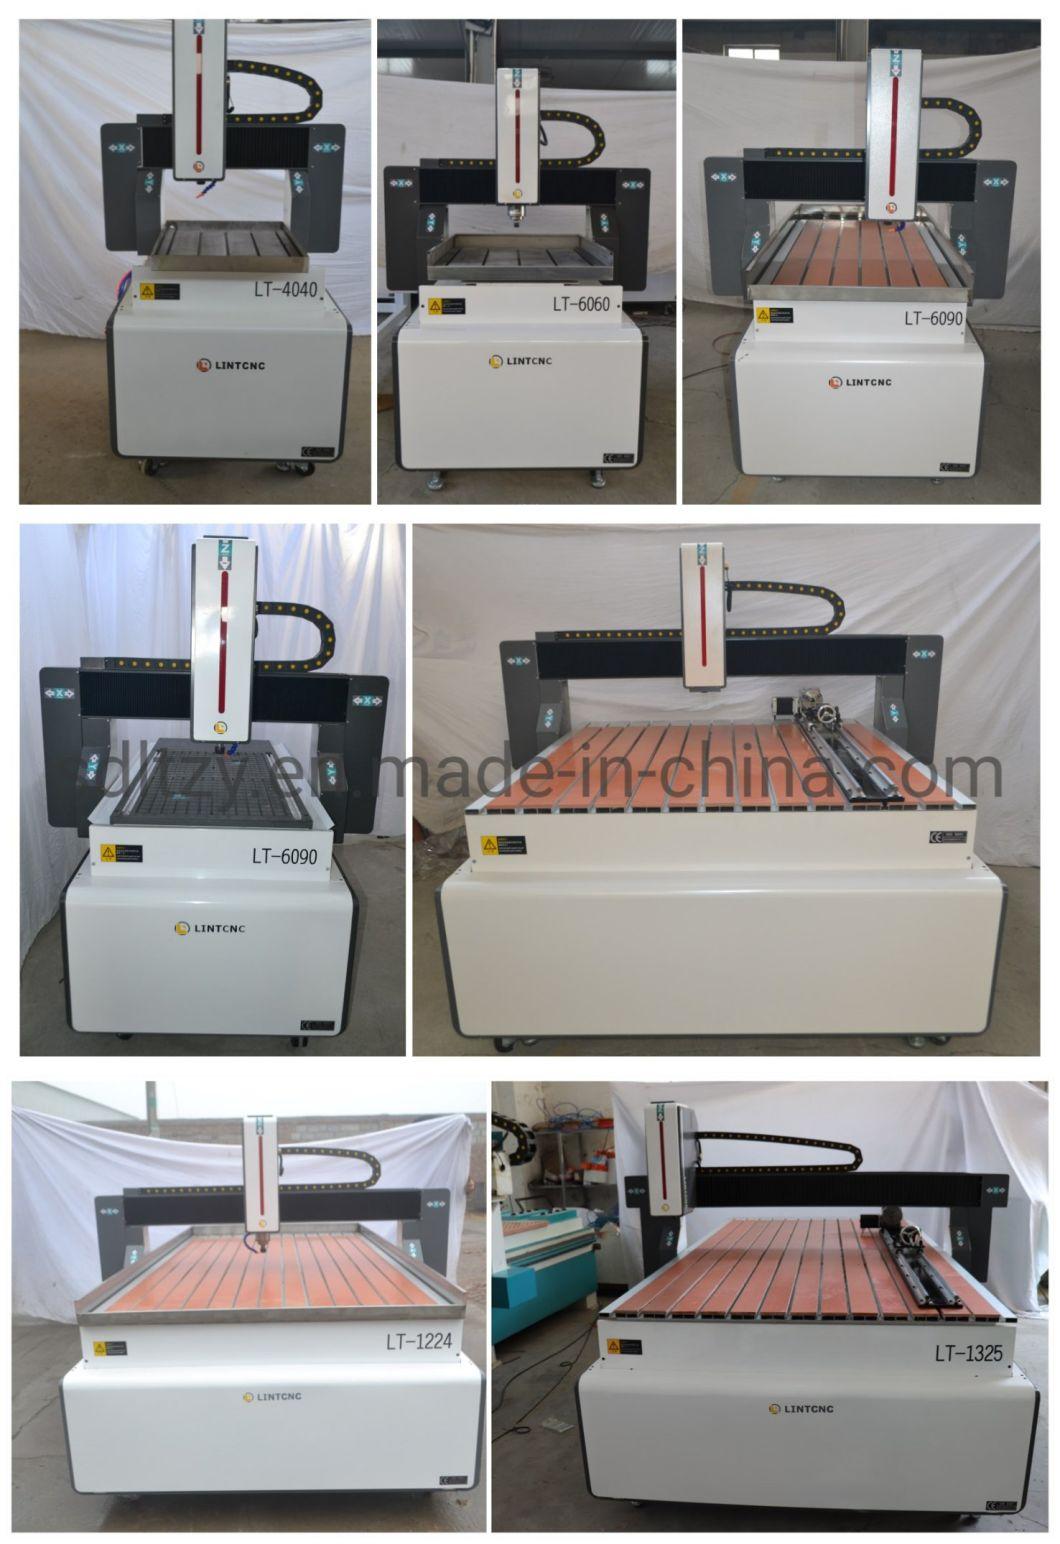 Single Head Two Heads Aluminum Copper Processing CNC Router 9012 with Water Mist Cooling System